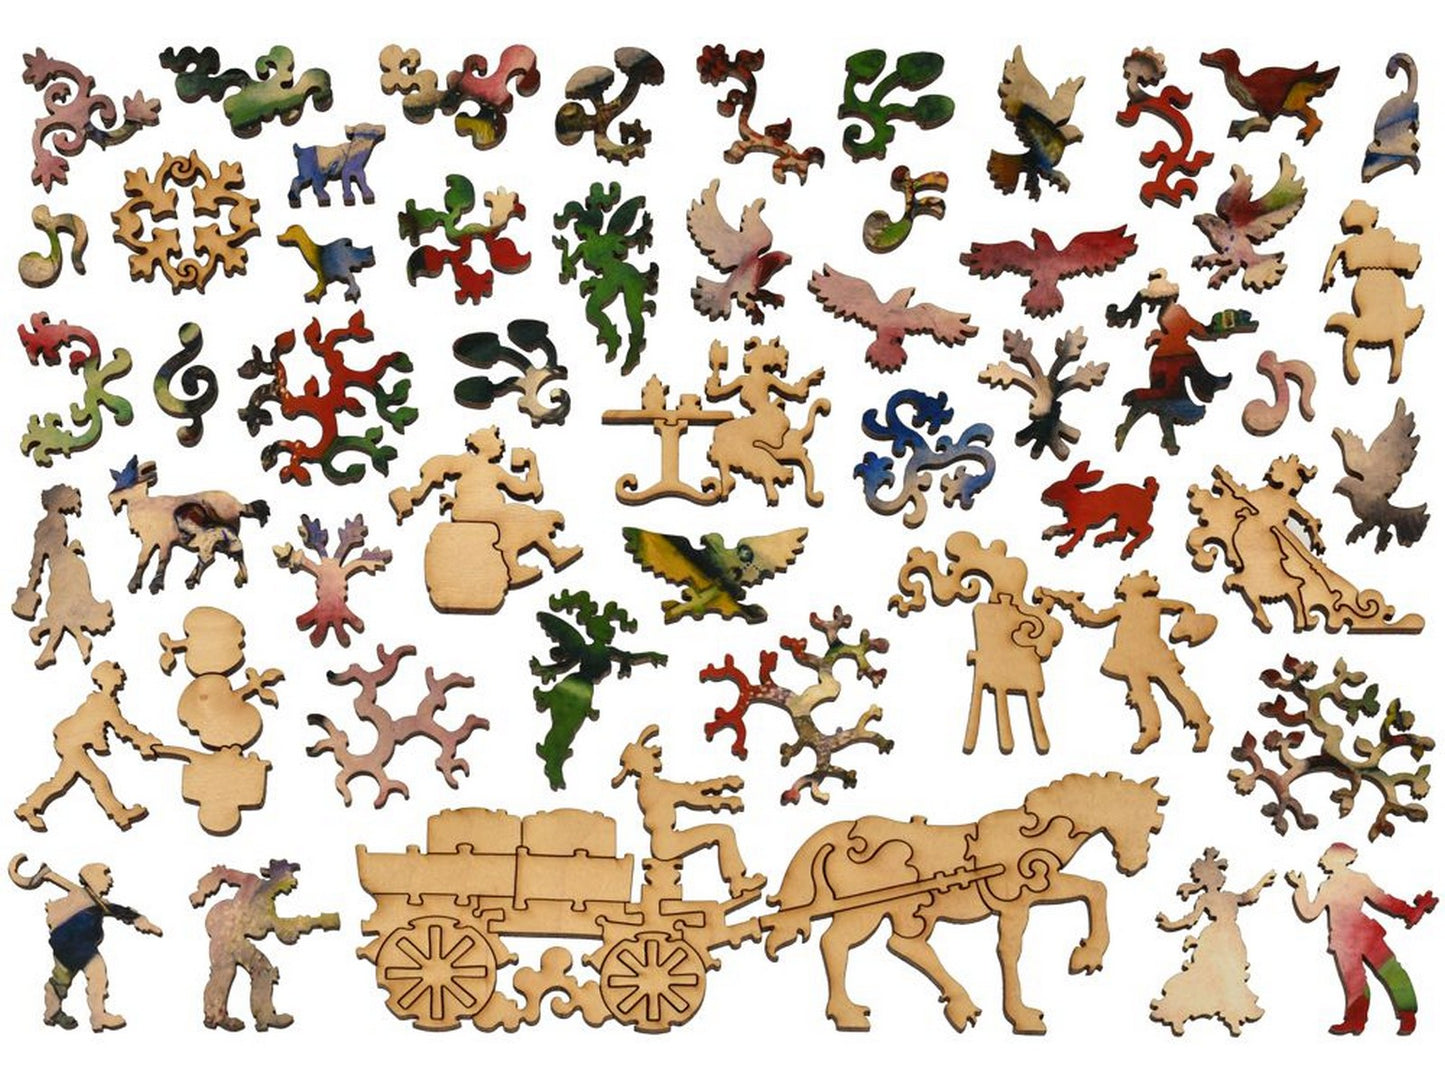 The whimsies that can be found in the puzzle, I and the Village.